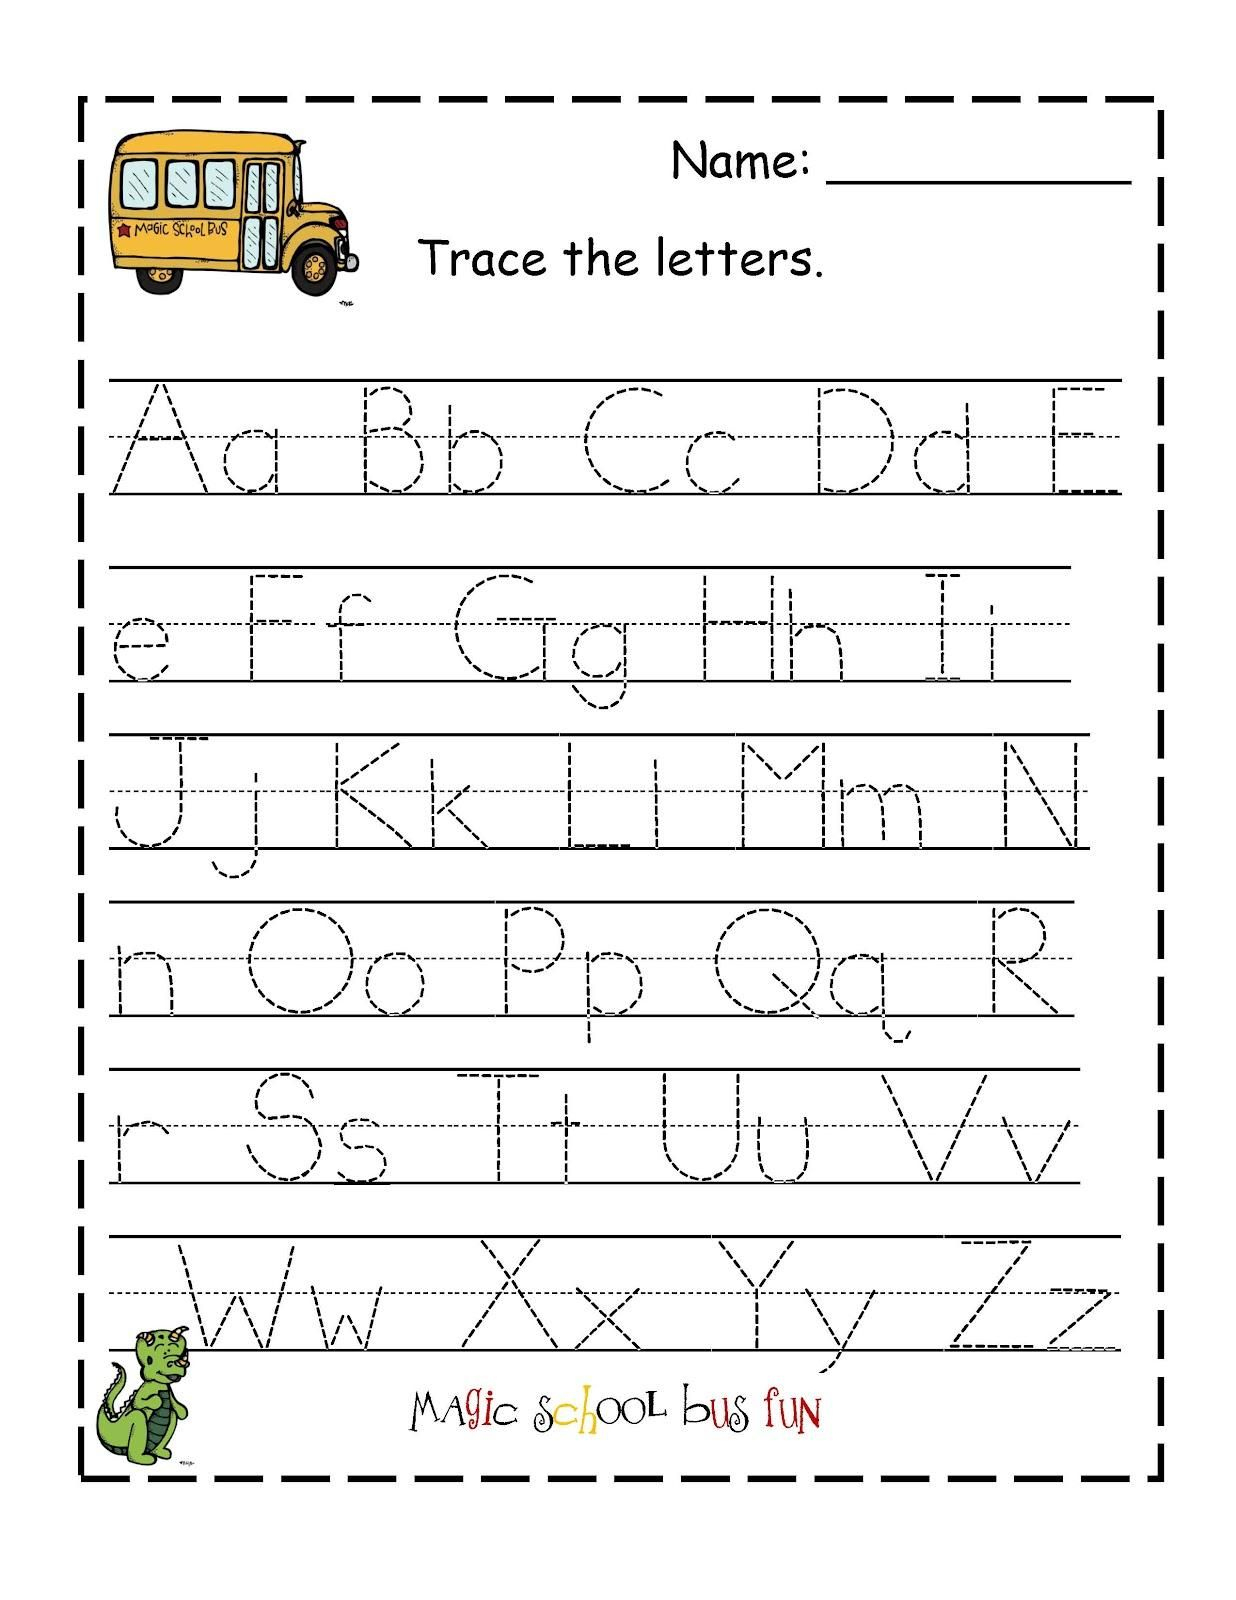 Free Printable Abc Tracing Worksheets #2 | Places To Visit - Free Printable Alphabet Tracing Worksheets